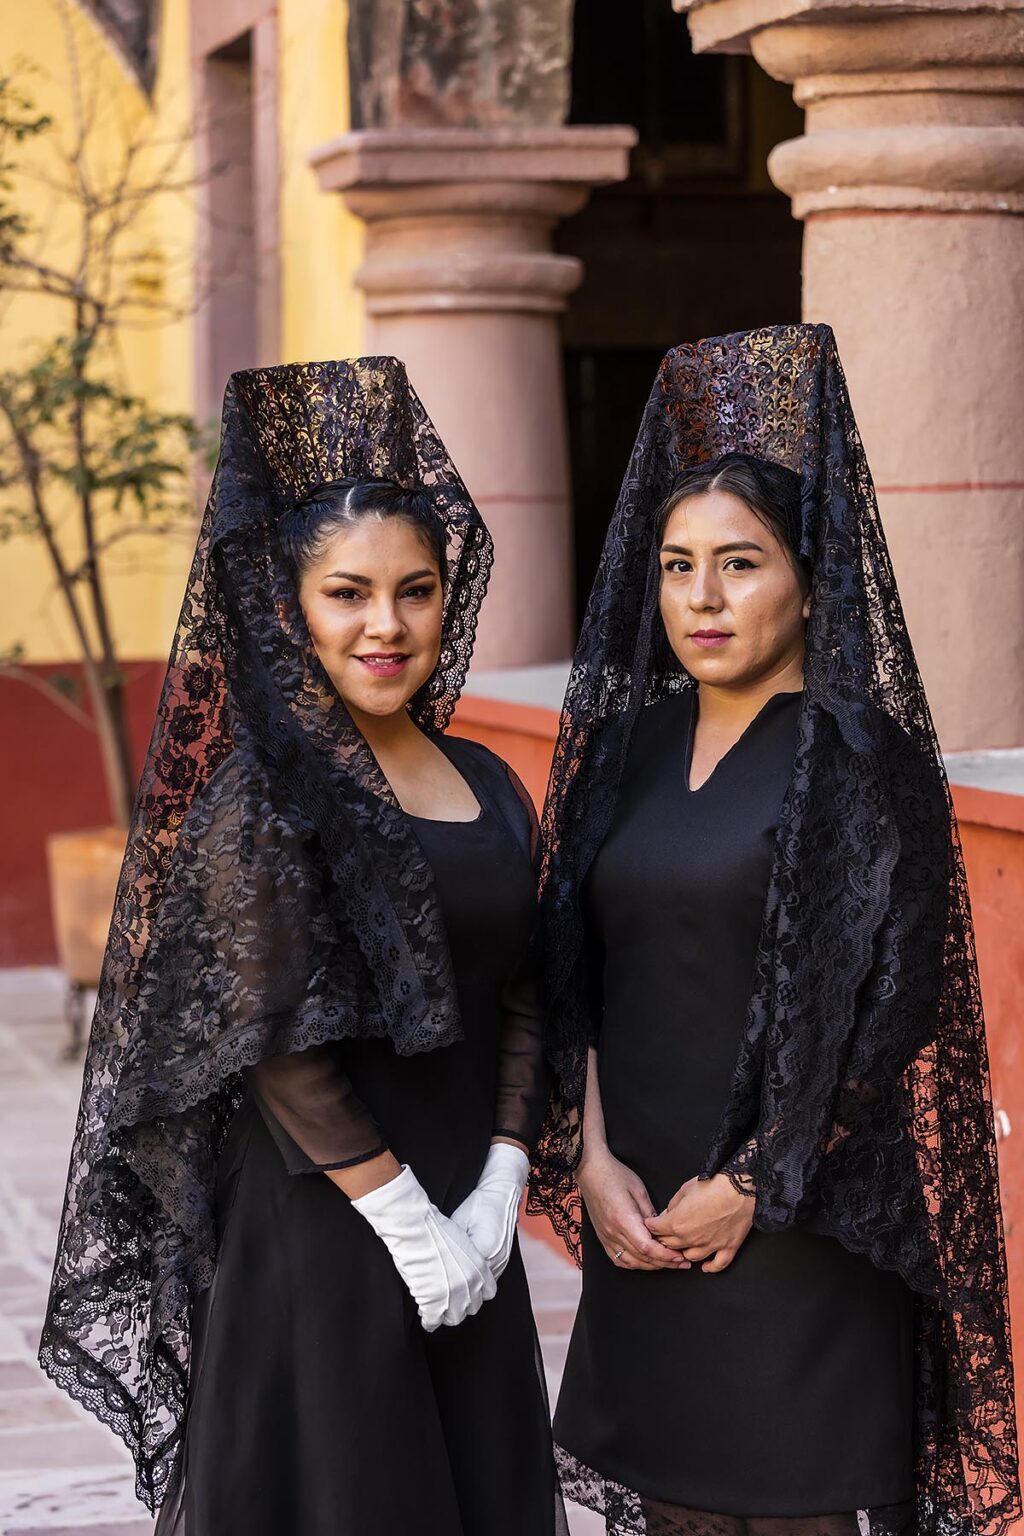 Women in traditional mantillas in the ORATORIO CHURCH courtyard get ready for the Good Friday Procession - SAN MIGUEL DE ALLENDE, MEXICO